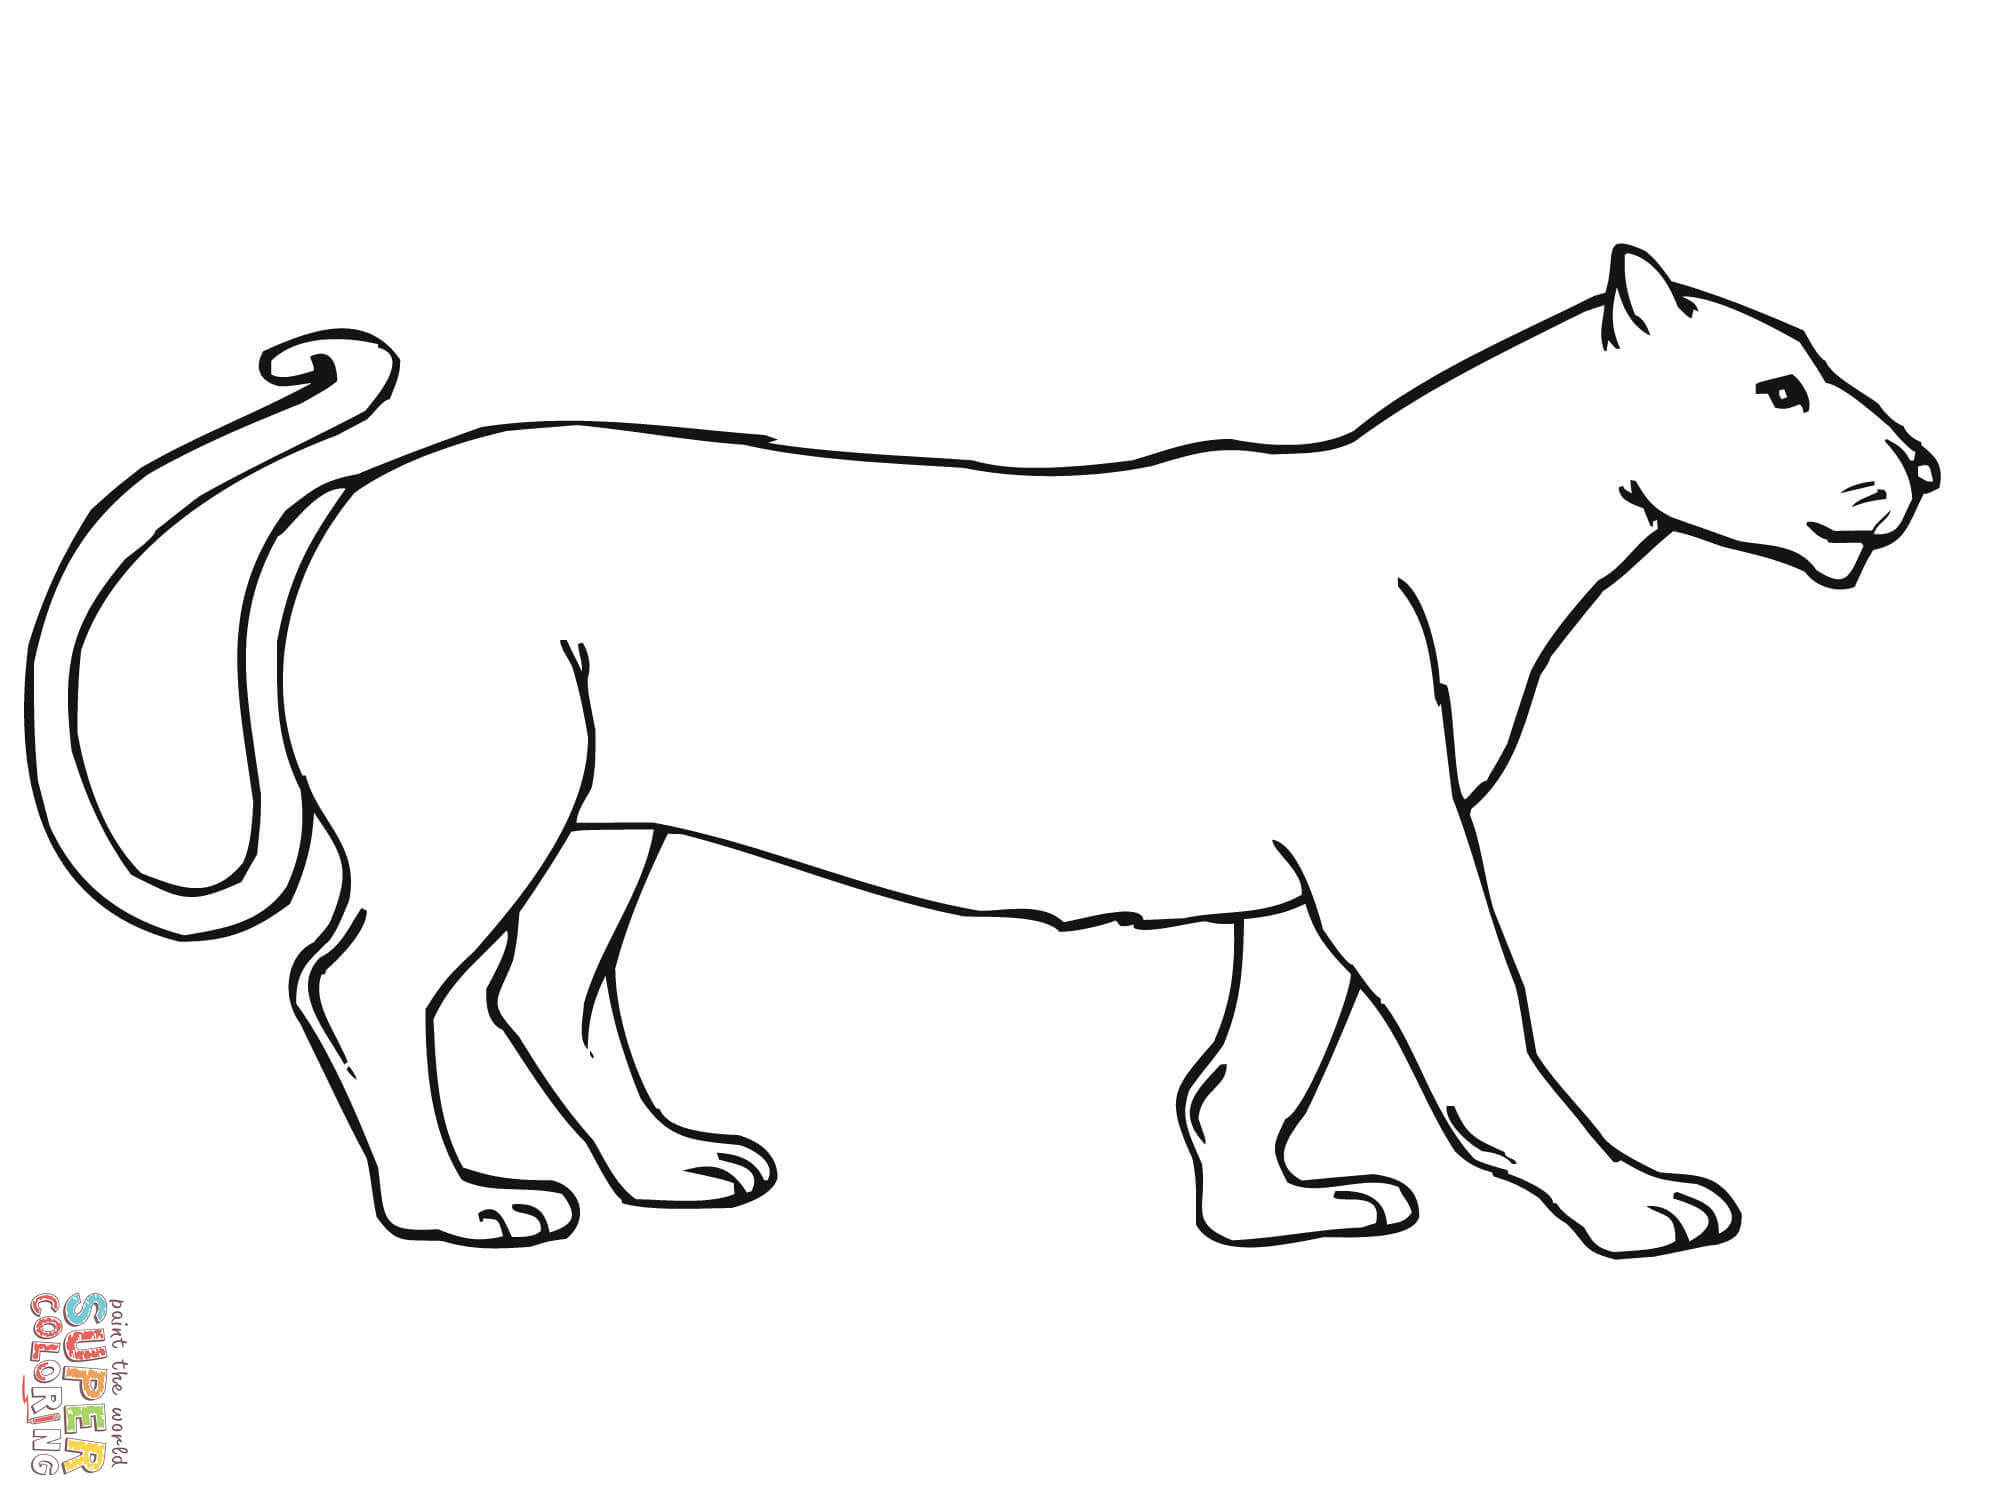 Coloring Pages Mountain Lion : Pin on Coloring pages / You might also